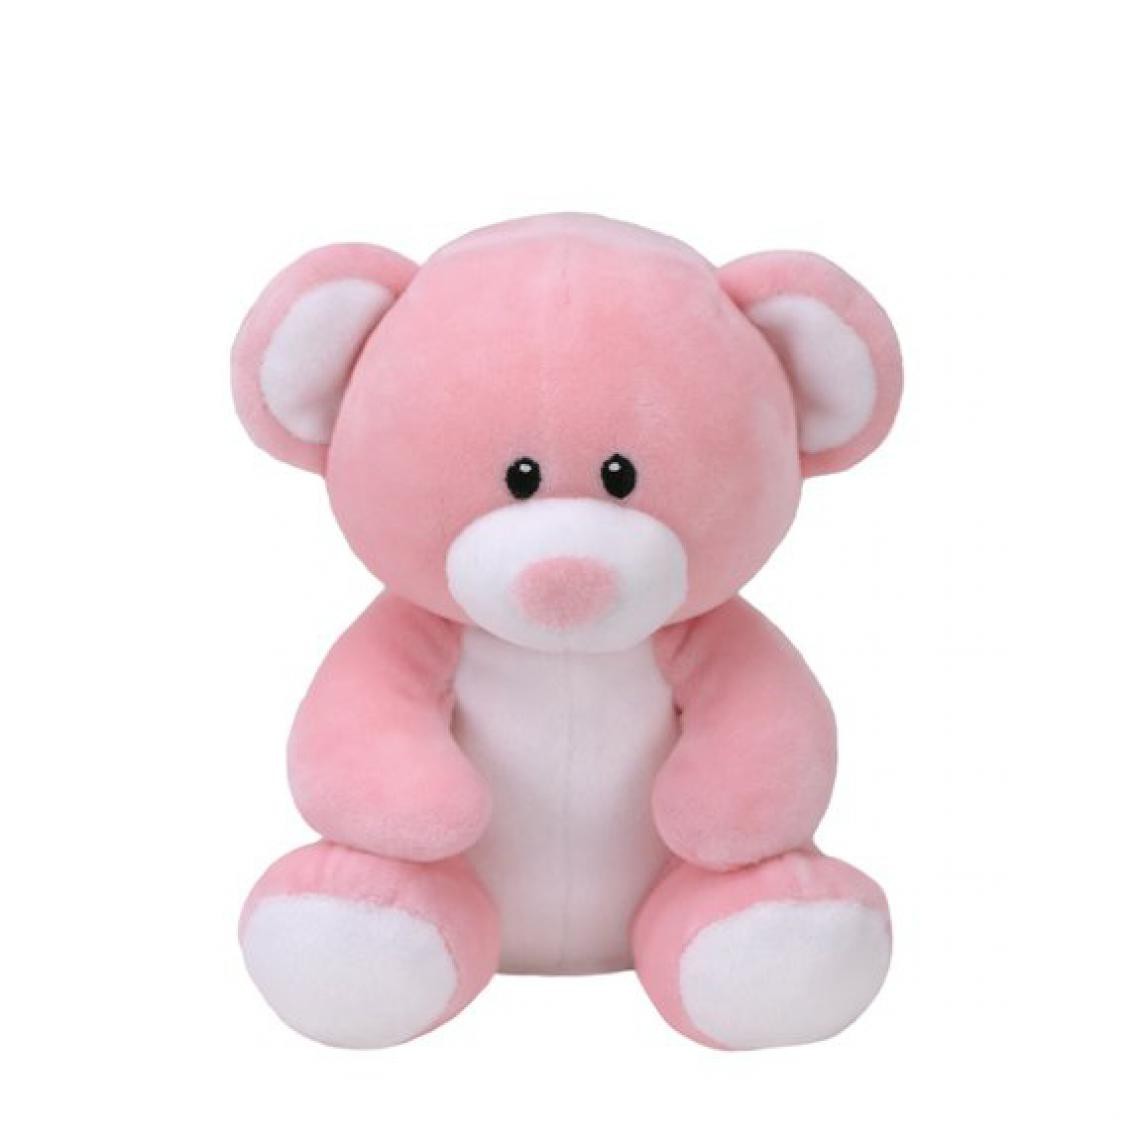 Ludendo - Baby Ty - Peluche Princesse l'Ours rose 25 cm - Animaux